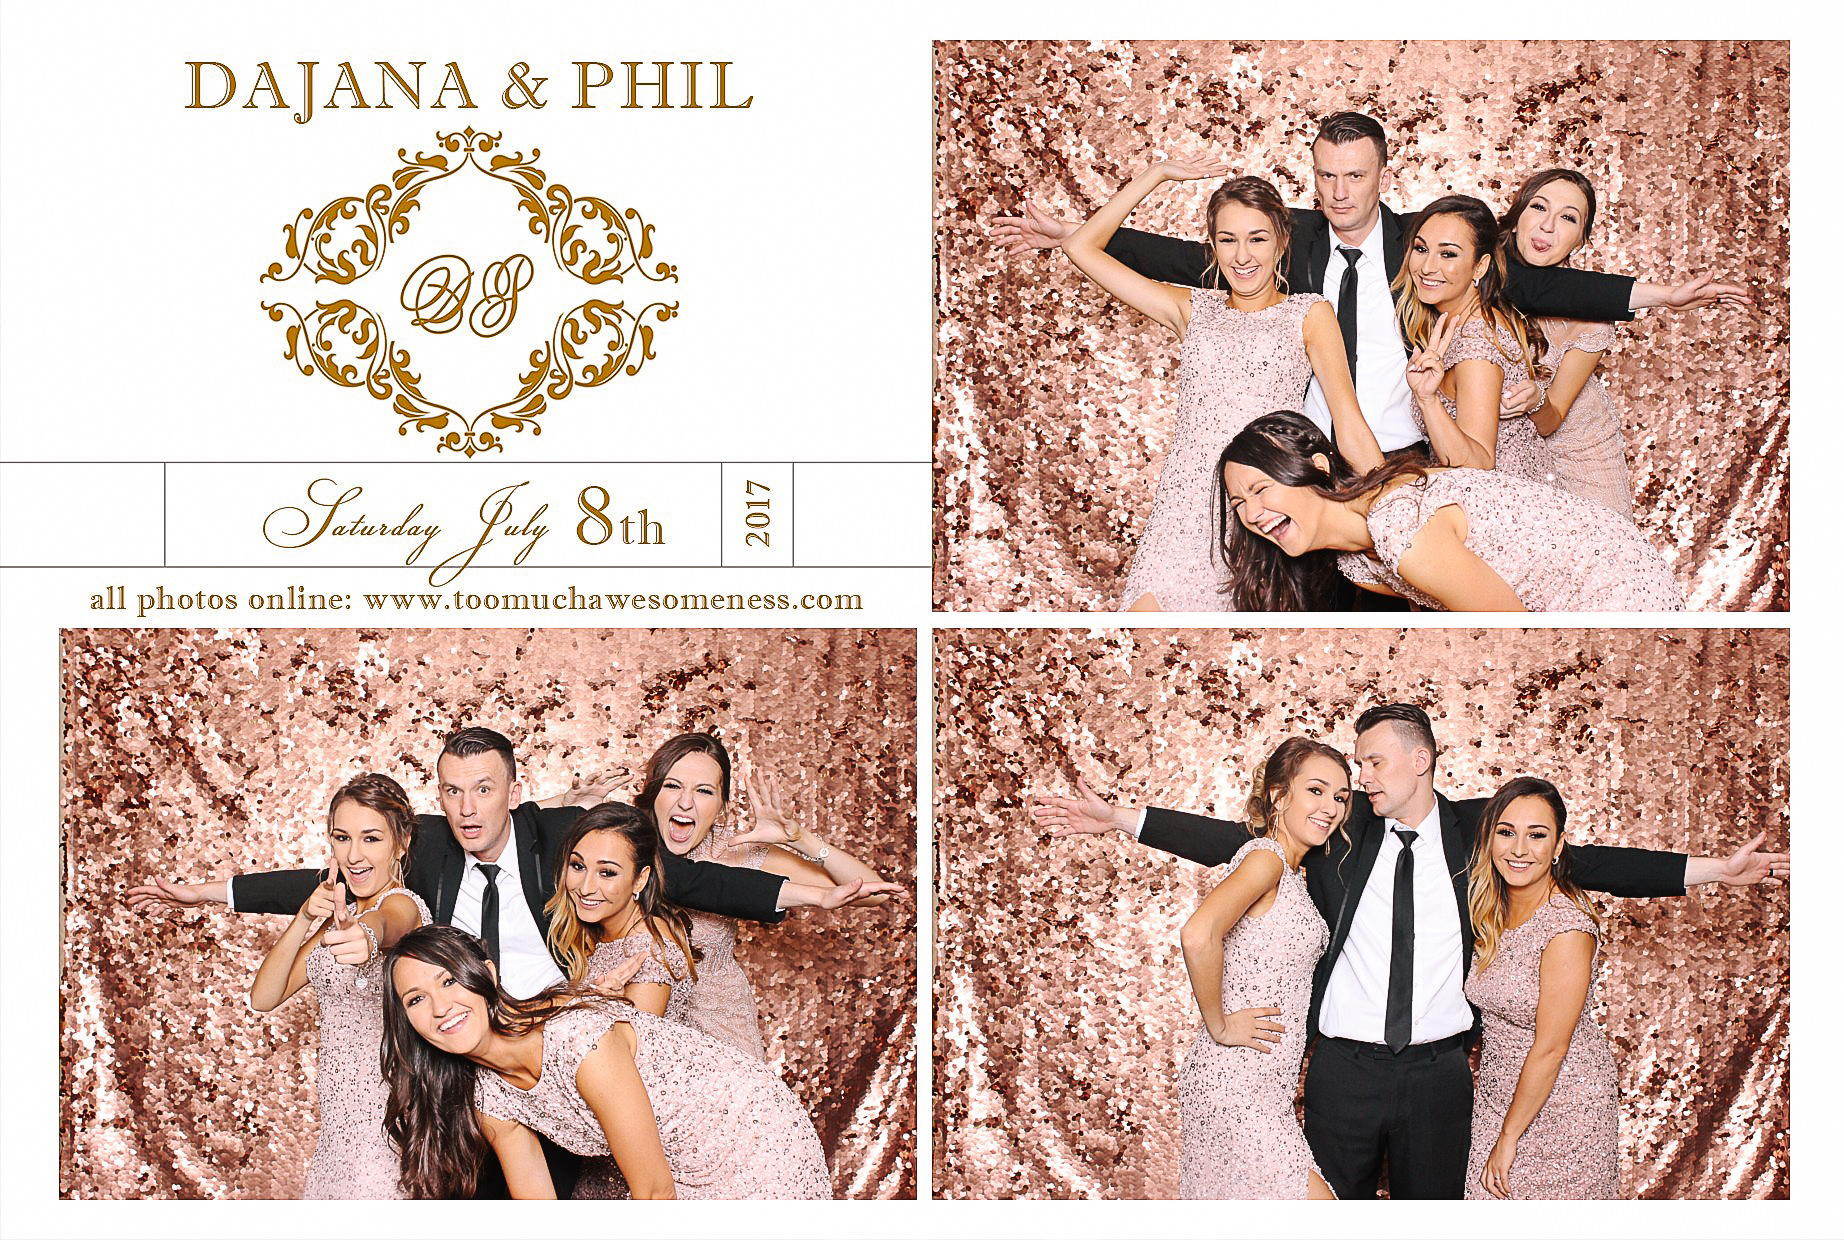 00768 Dajana and Phil Taylor Wedding Photos photobooth by too much awesomeness.jpg